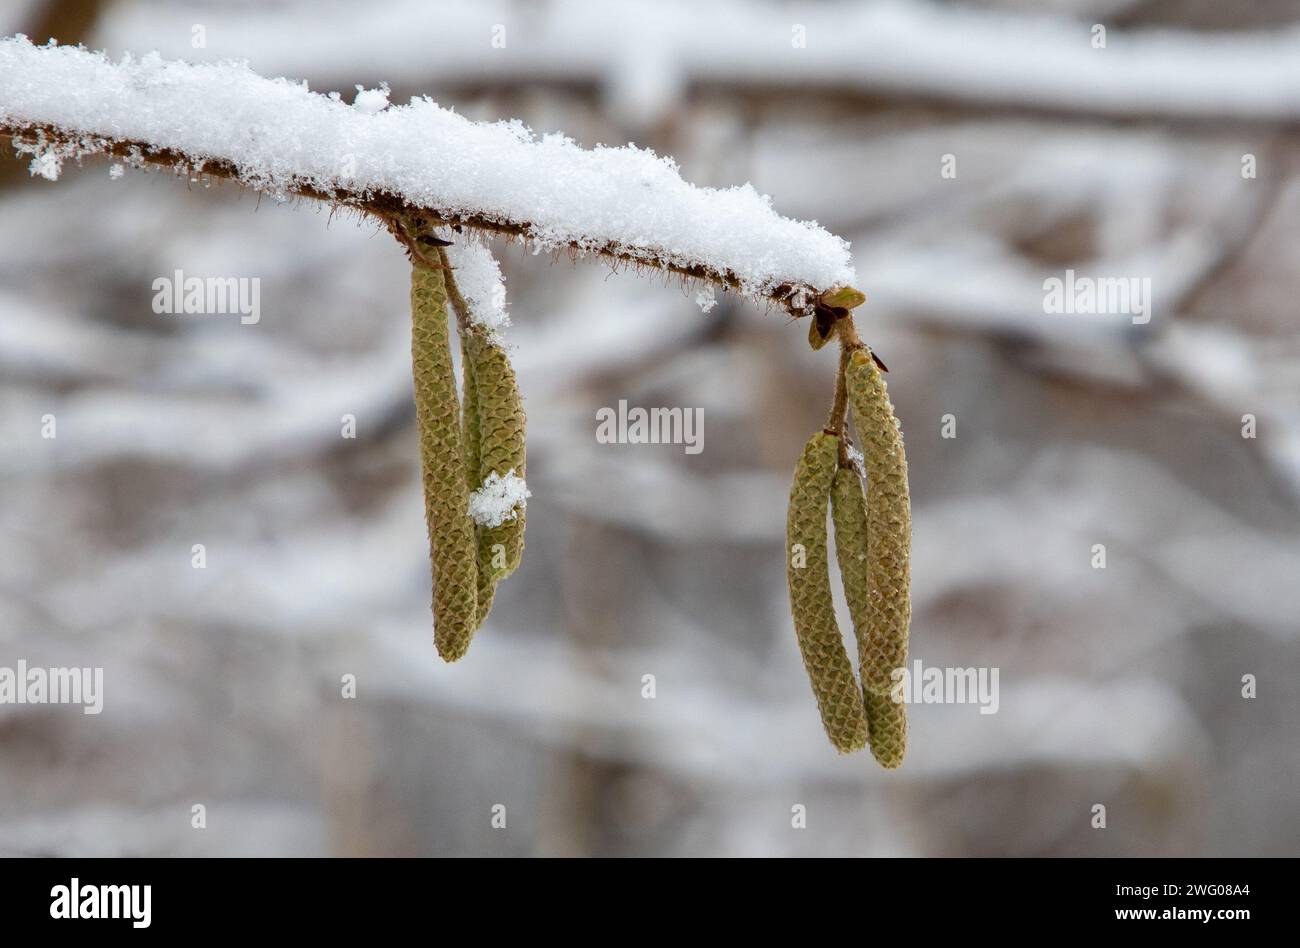 A twig with Corylus avellana flowers in winter Stock Photo